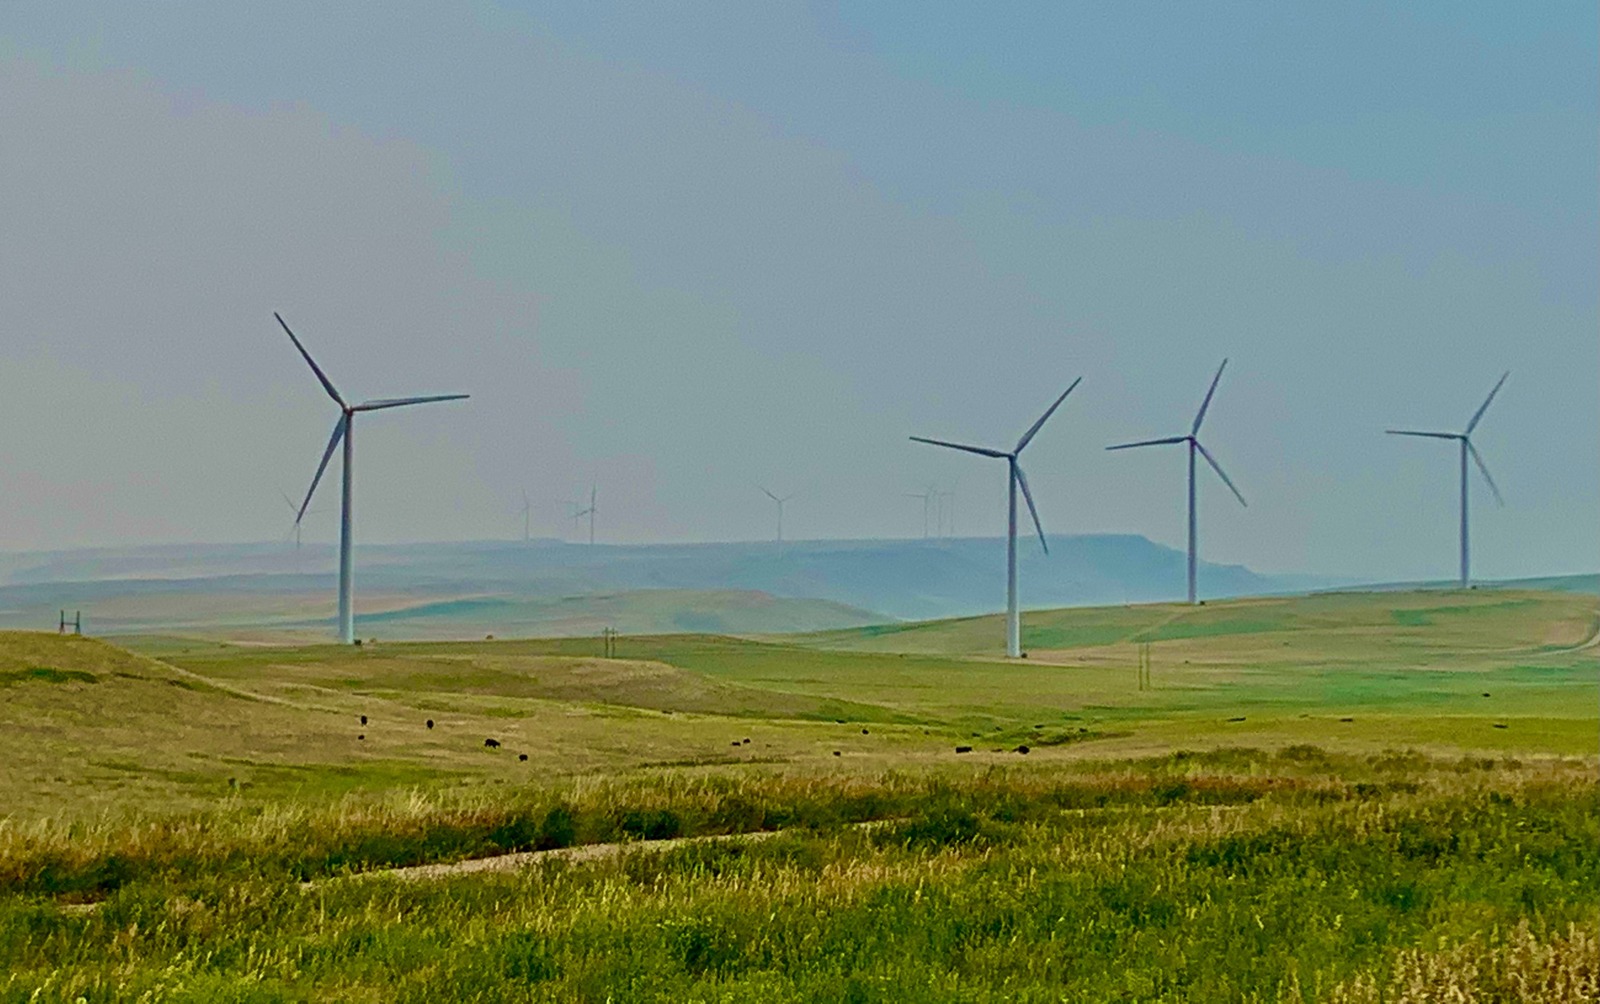 Wind turbines in the "wind belt" of central Montana. Together, Wyoming and Montana possess an abundance of wind resources to power alternative energy but the blades of turbines can be deadly to birds which ride the same wind currents. Photo by Todd Wilkinson